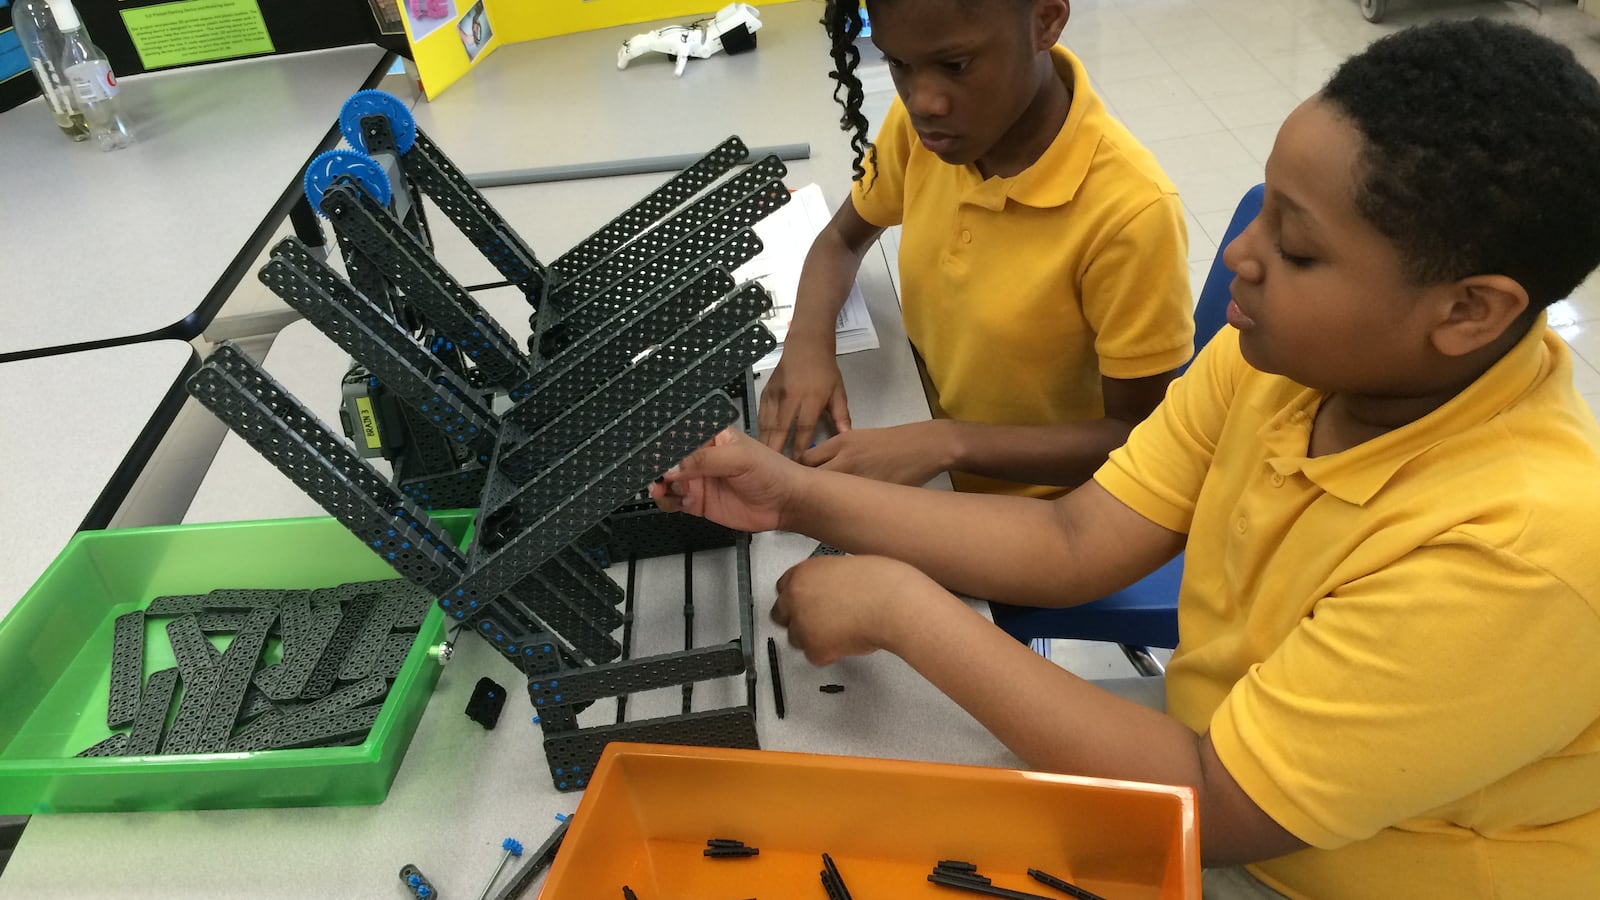 Whitehaven Elementary School students work on a robotics project. The Memphis school has moved off of the state's list of lowest-performing schools.